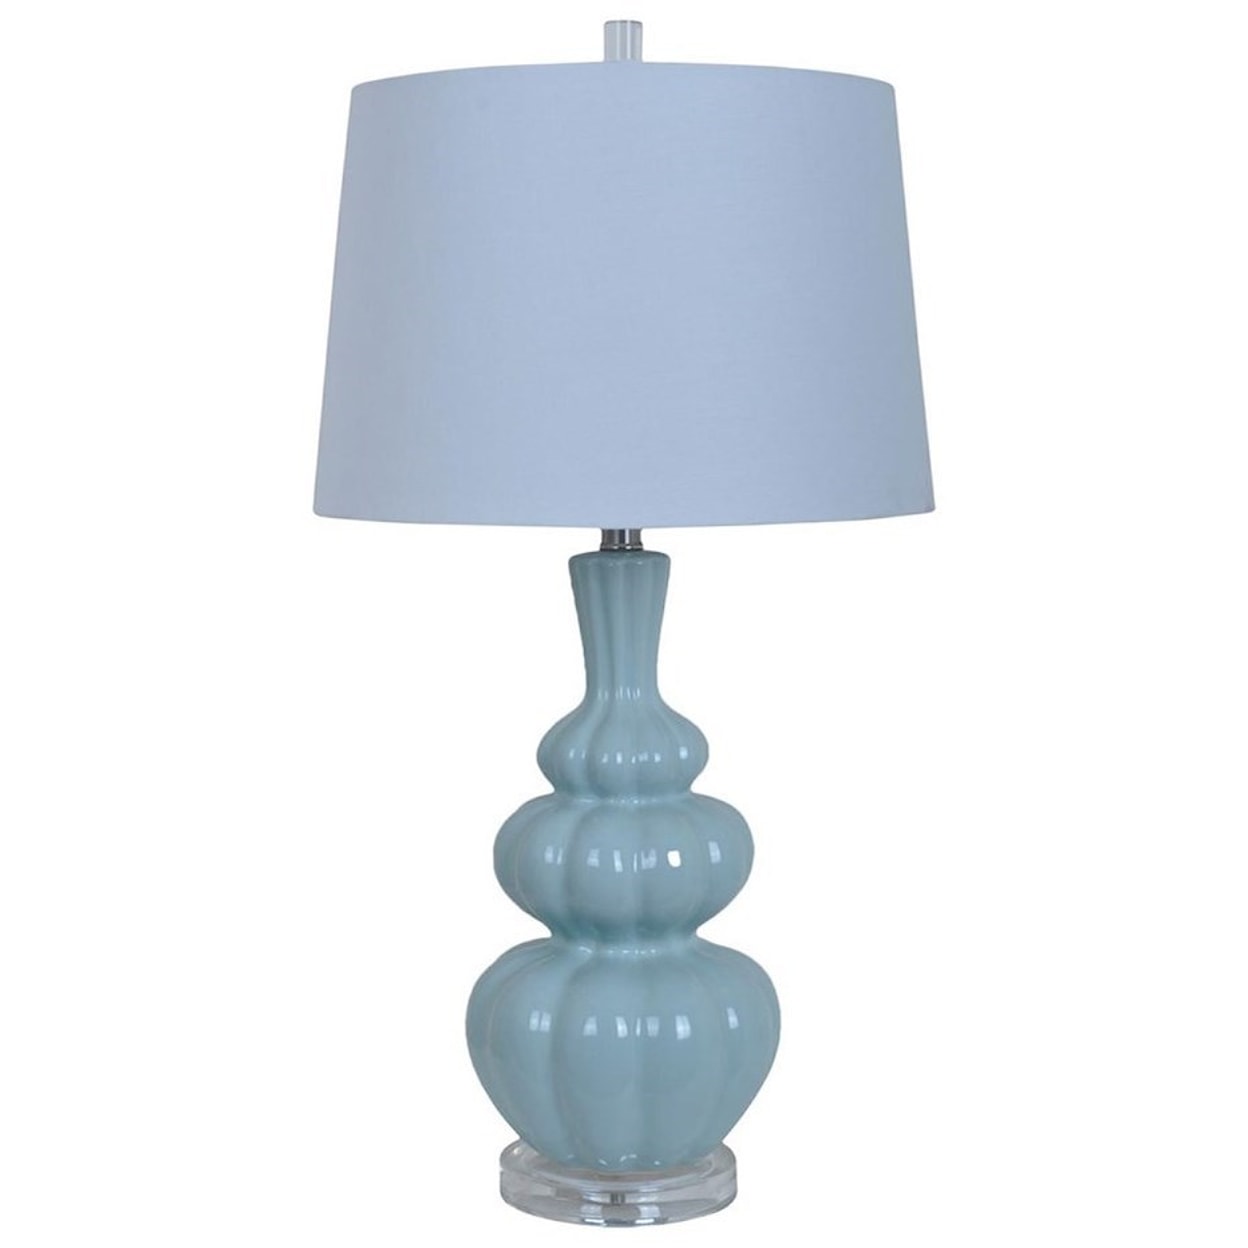 Crestview Collection Lighting Strata Table Lamp